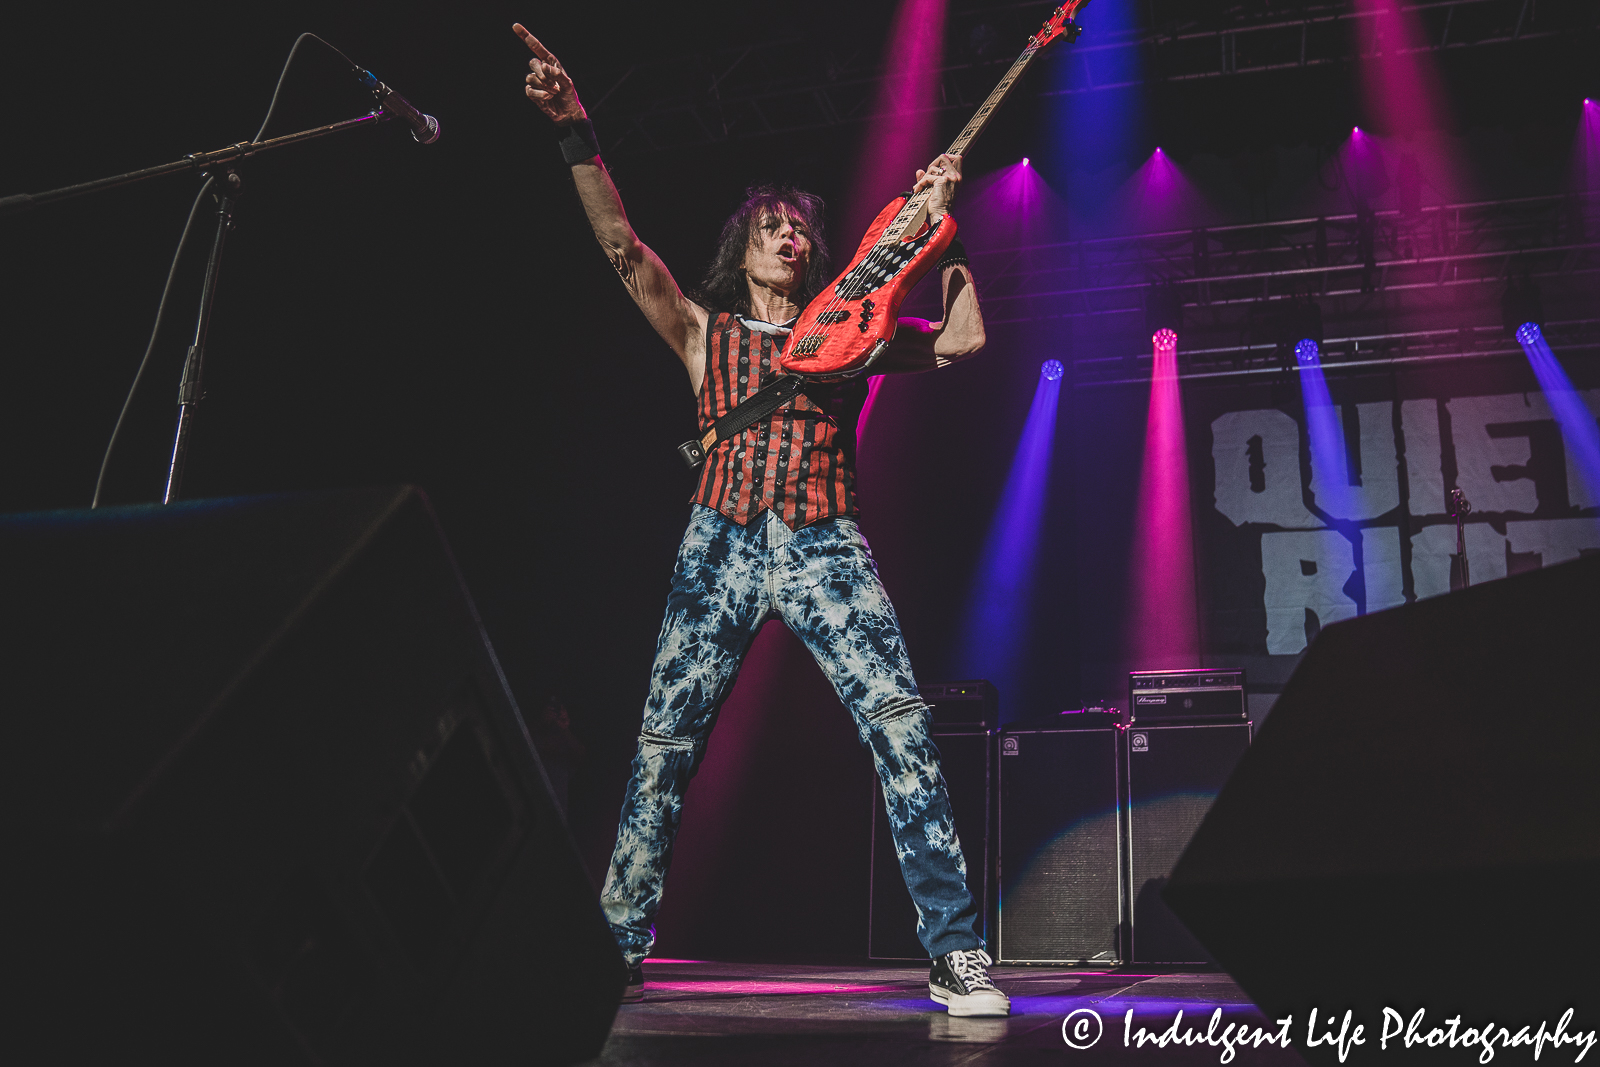 Bass player Rudy Sarzo of Quiet Riot in a live performance at Star Pavilion inside of Ameristar Casino in Kansas City, MO on July 29, 2022.